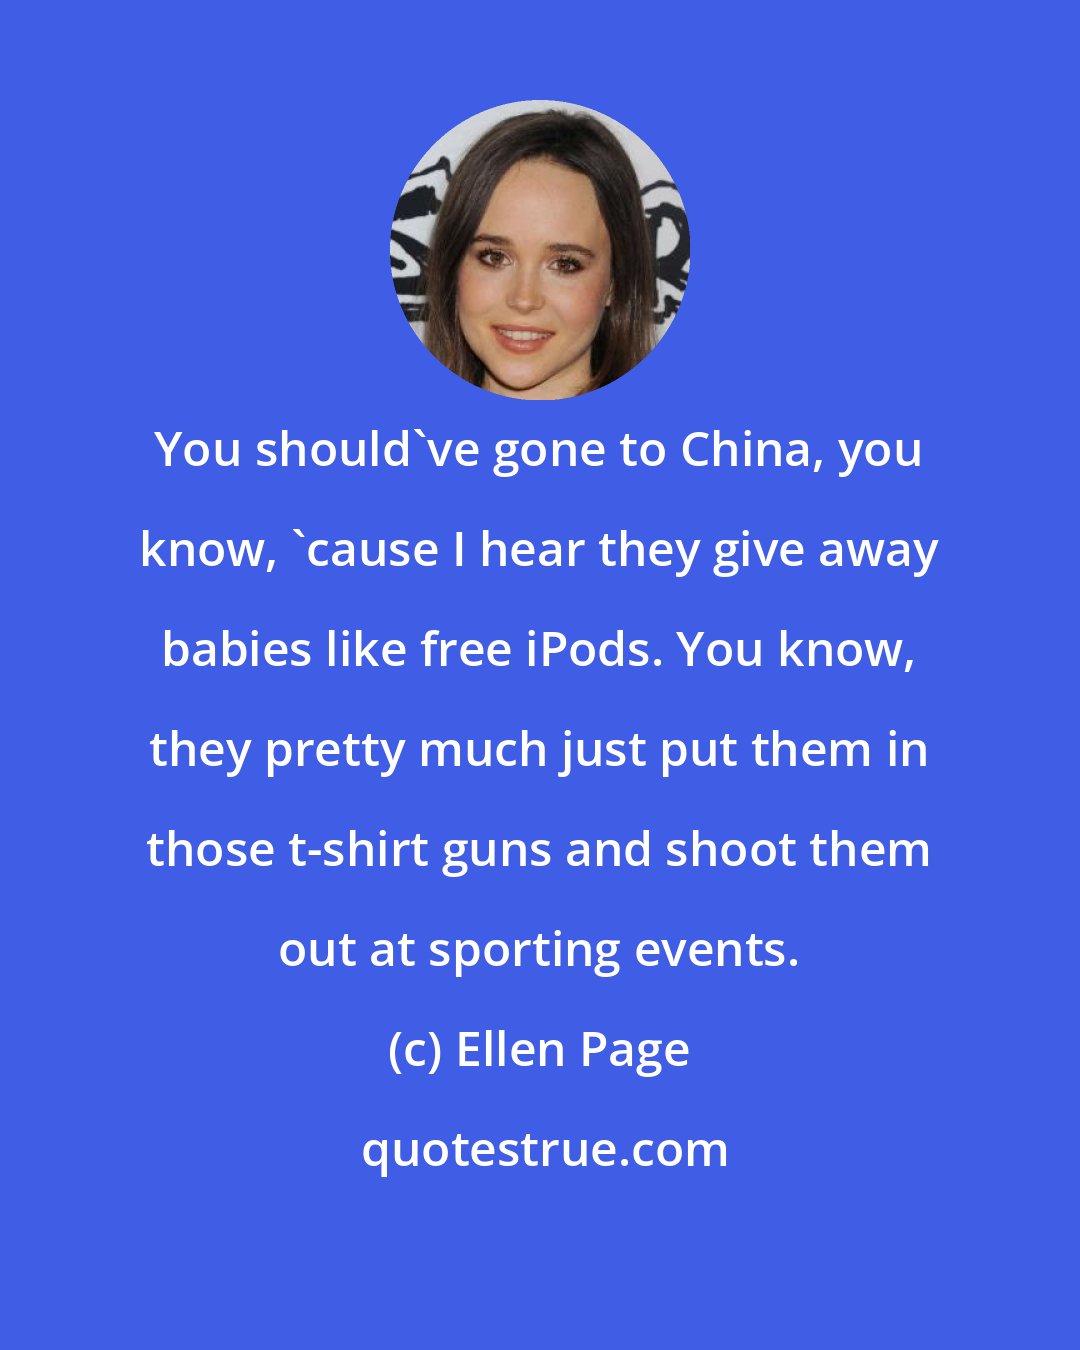 Ellen Page: You should've gone to China, you know, 'cause I hear they give away babies like free iPods. You know, they pretty much just put them in those t-shirt guns and shoot them out at sporting events.